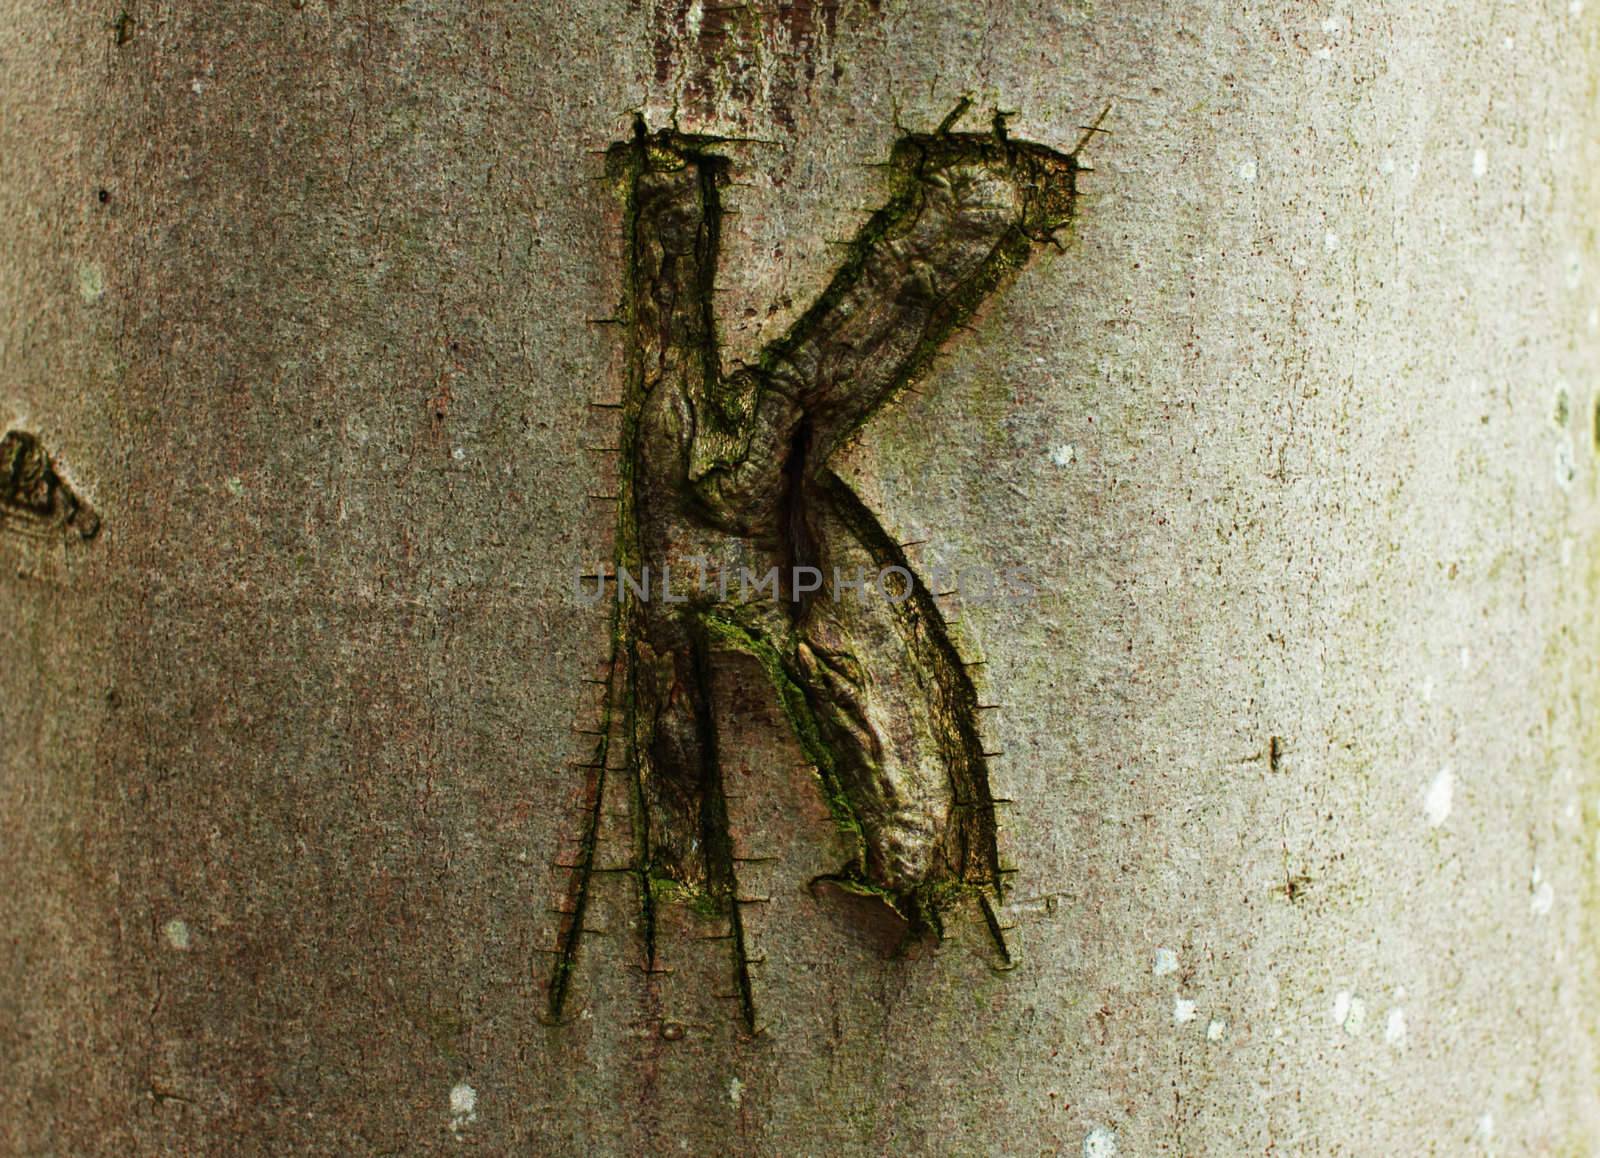 letter "K" cut long time ago on the tree steam